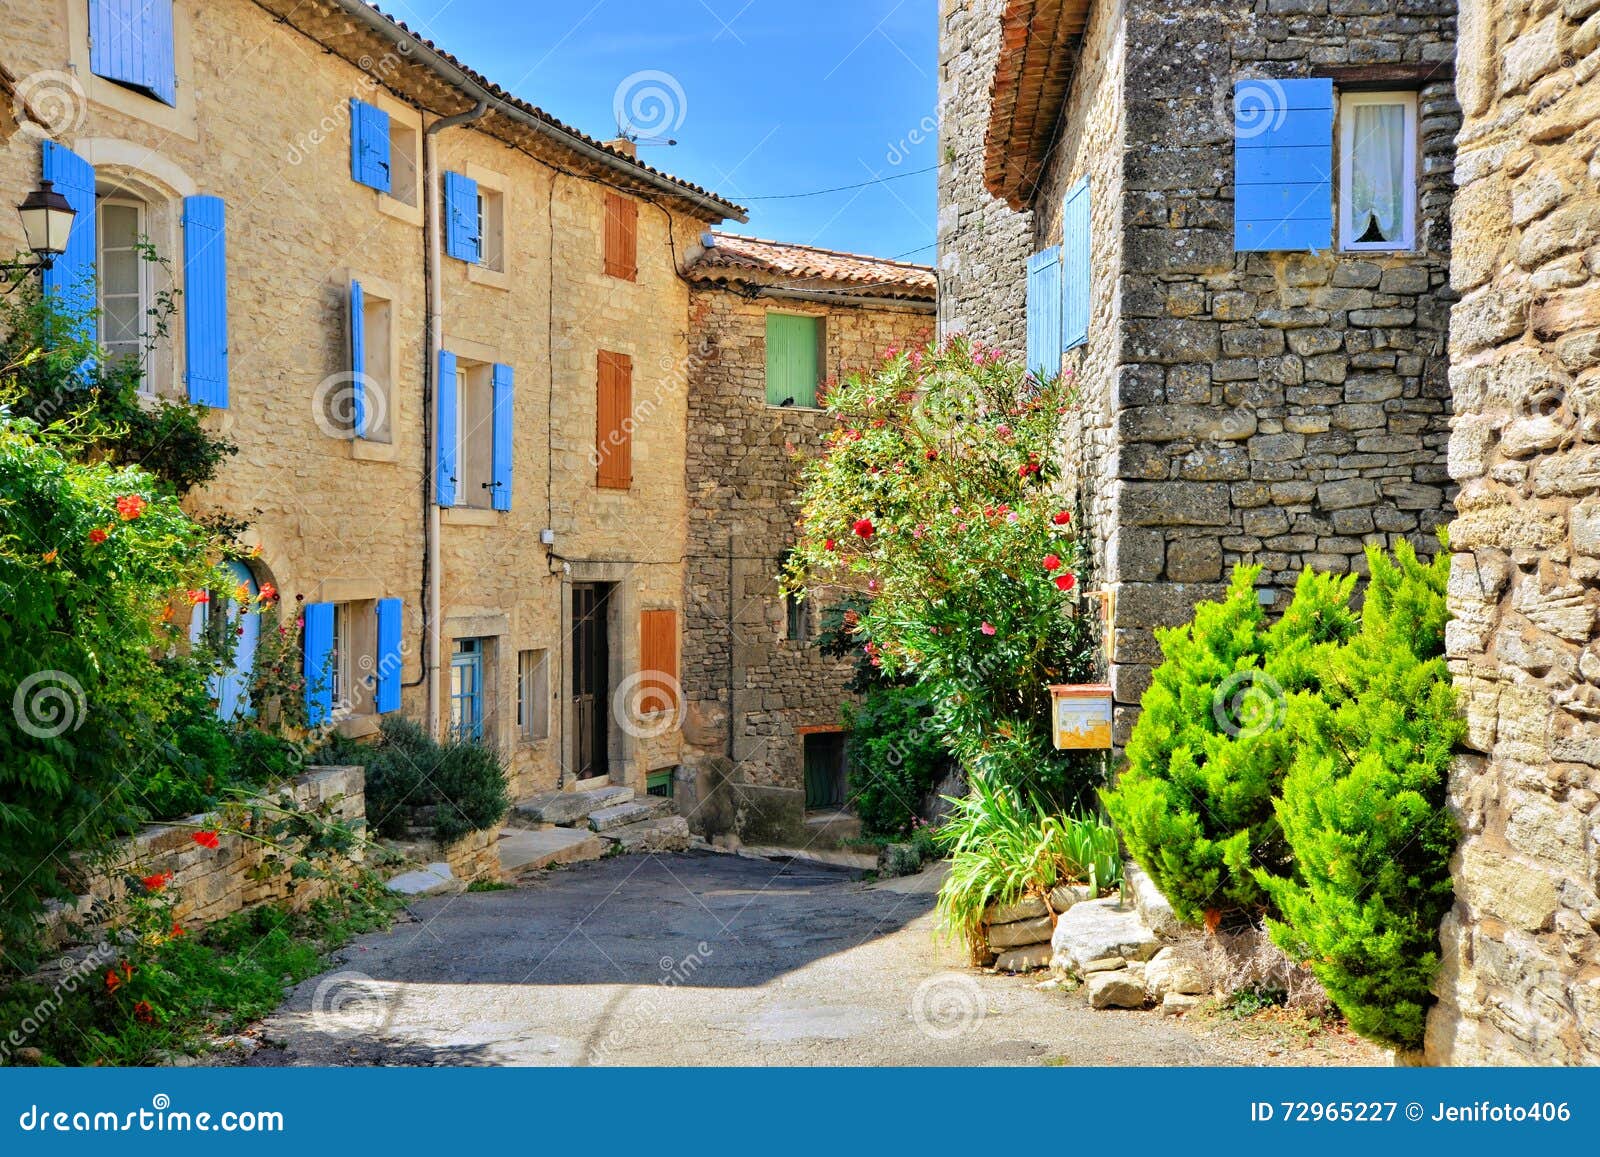 houses with colorful shuttered windows in provence, france